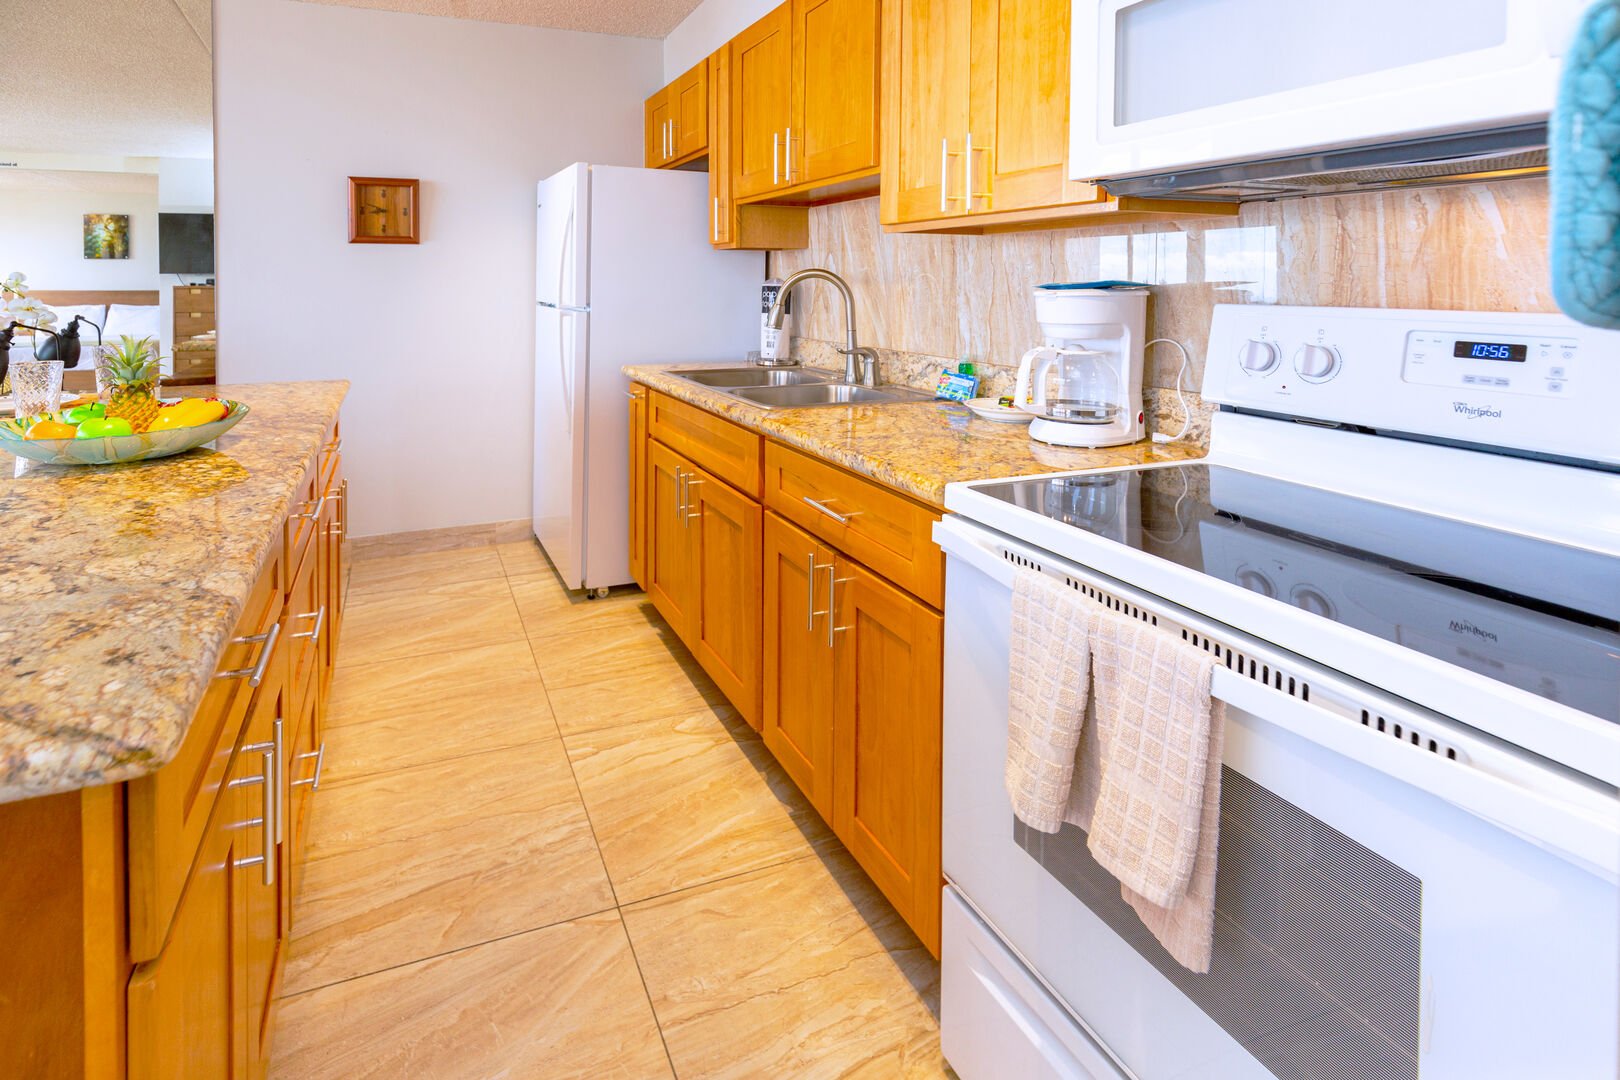 Fully equipped kitchen with all appliances and dining area